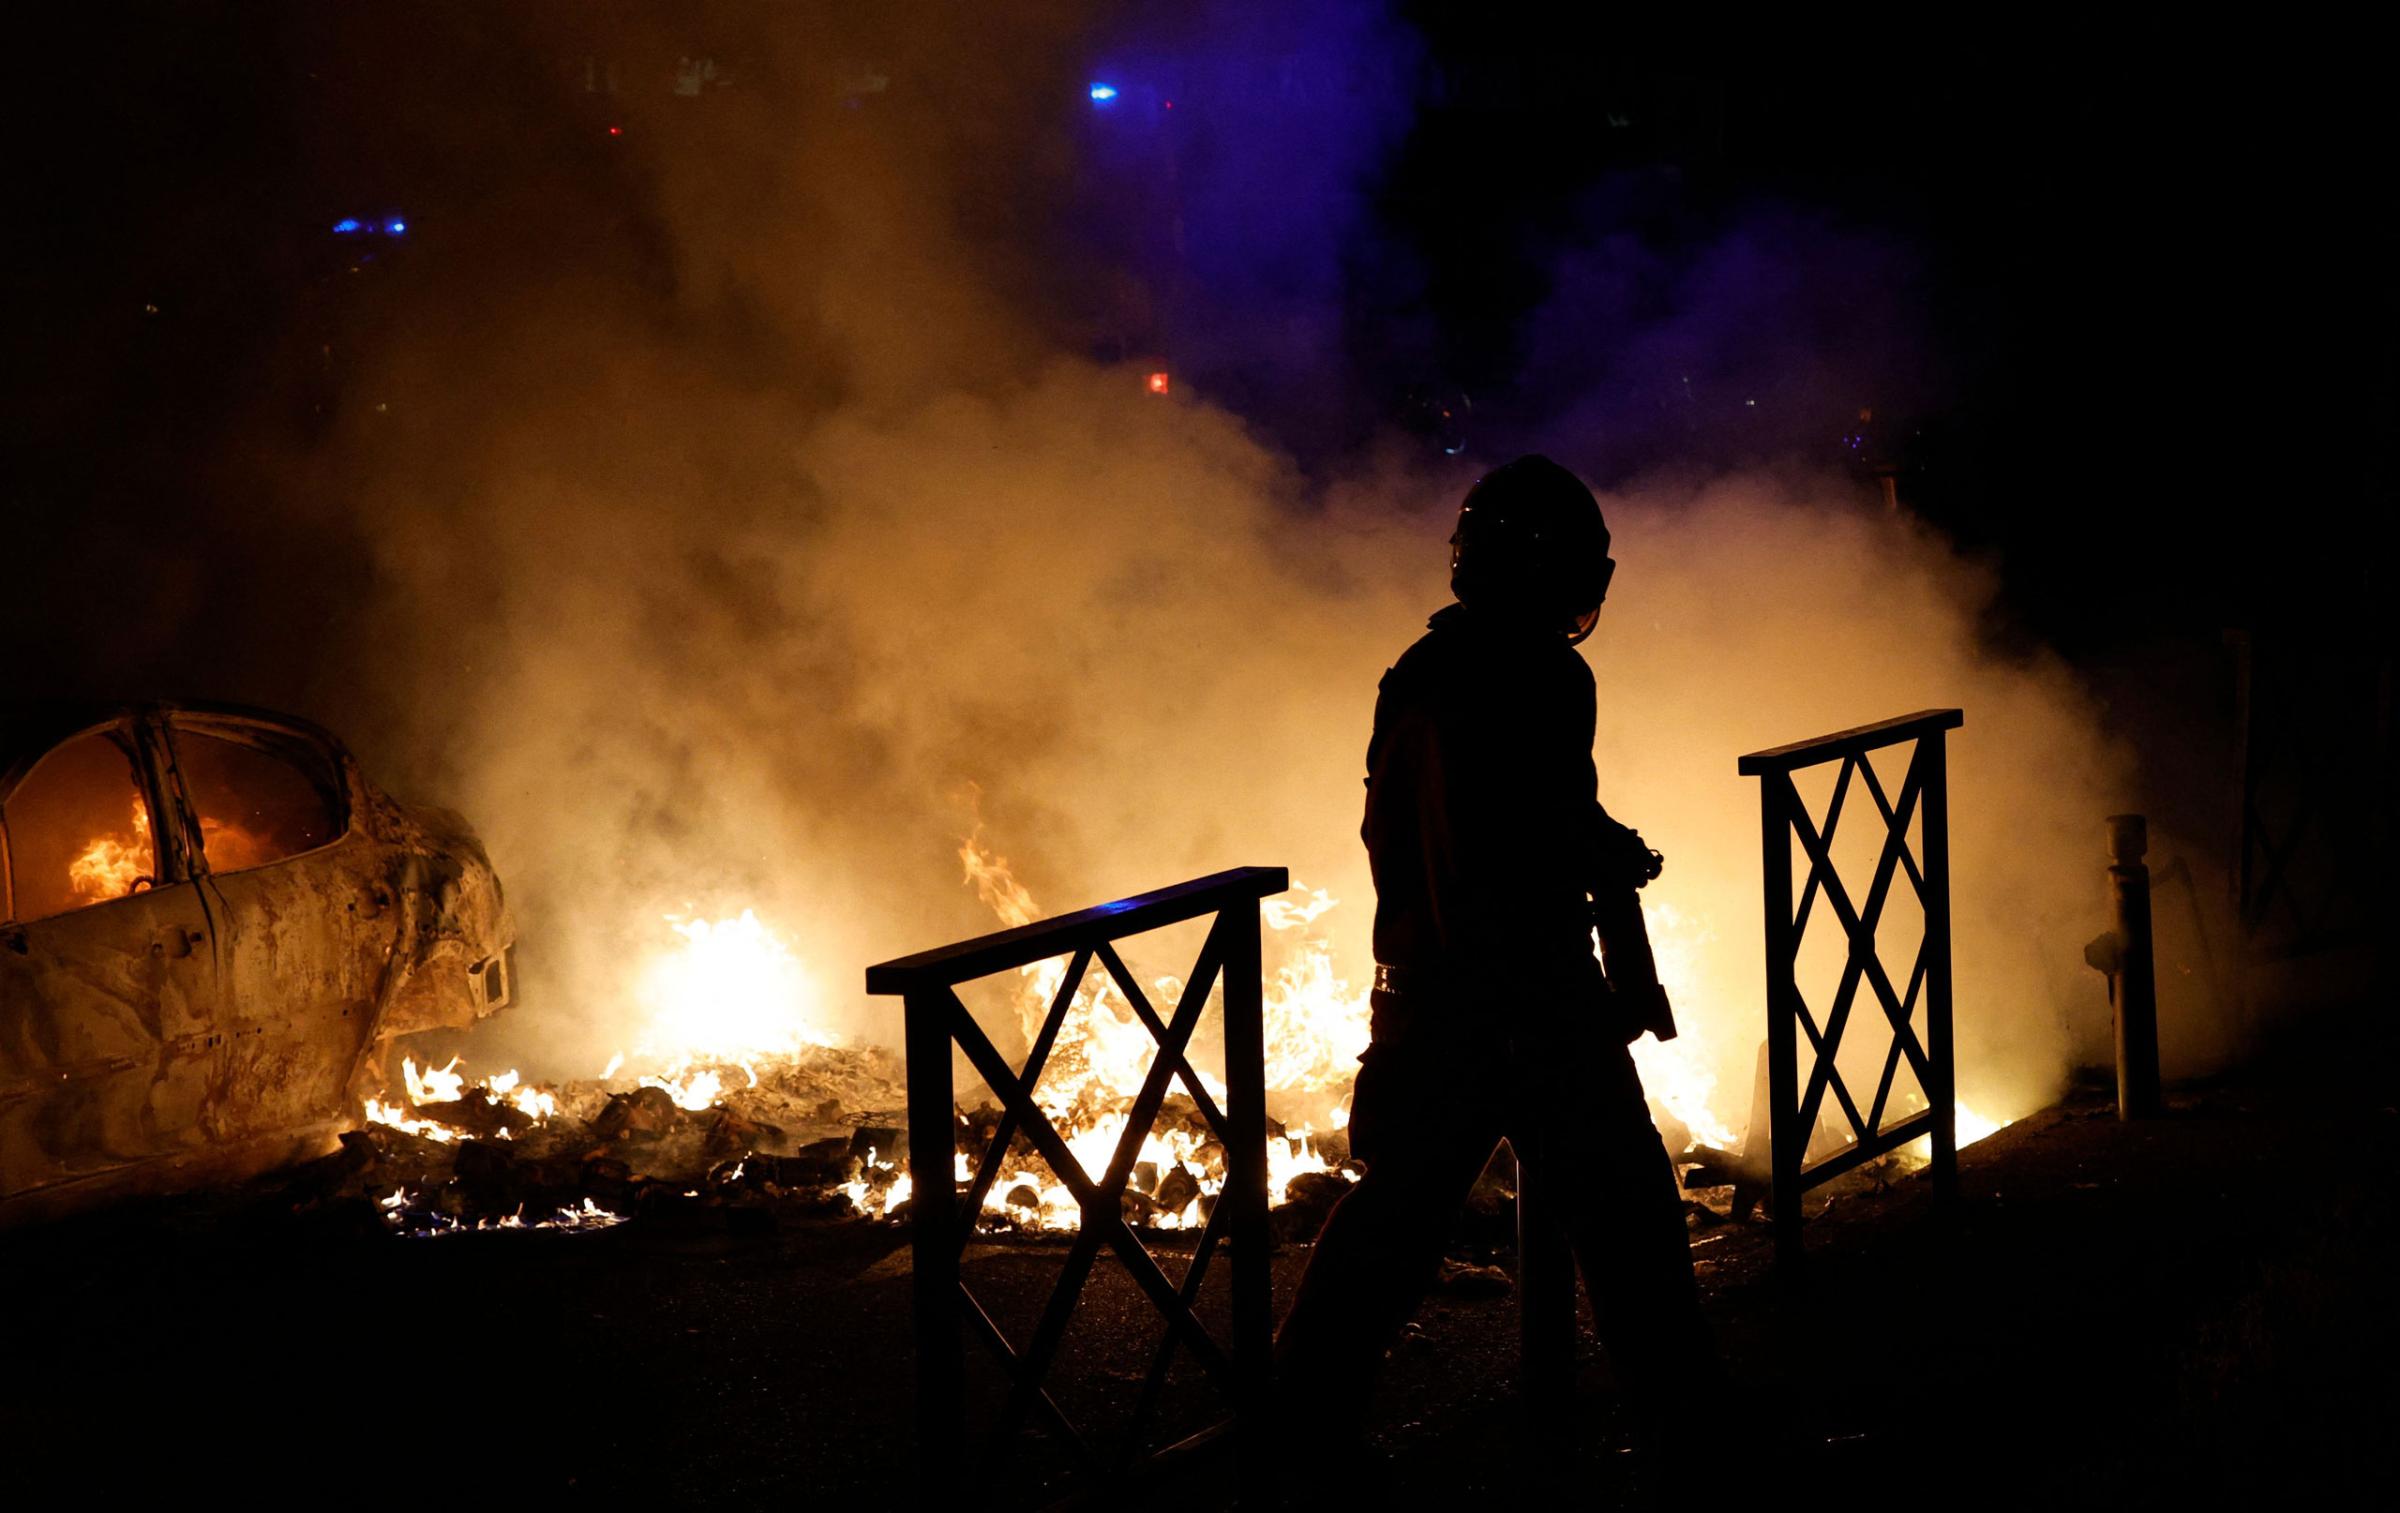 A firefighter extinguishes the flames of a car set on fire during protests in Nanterre